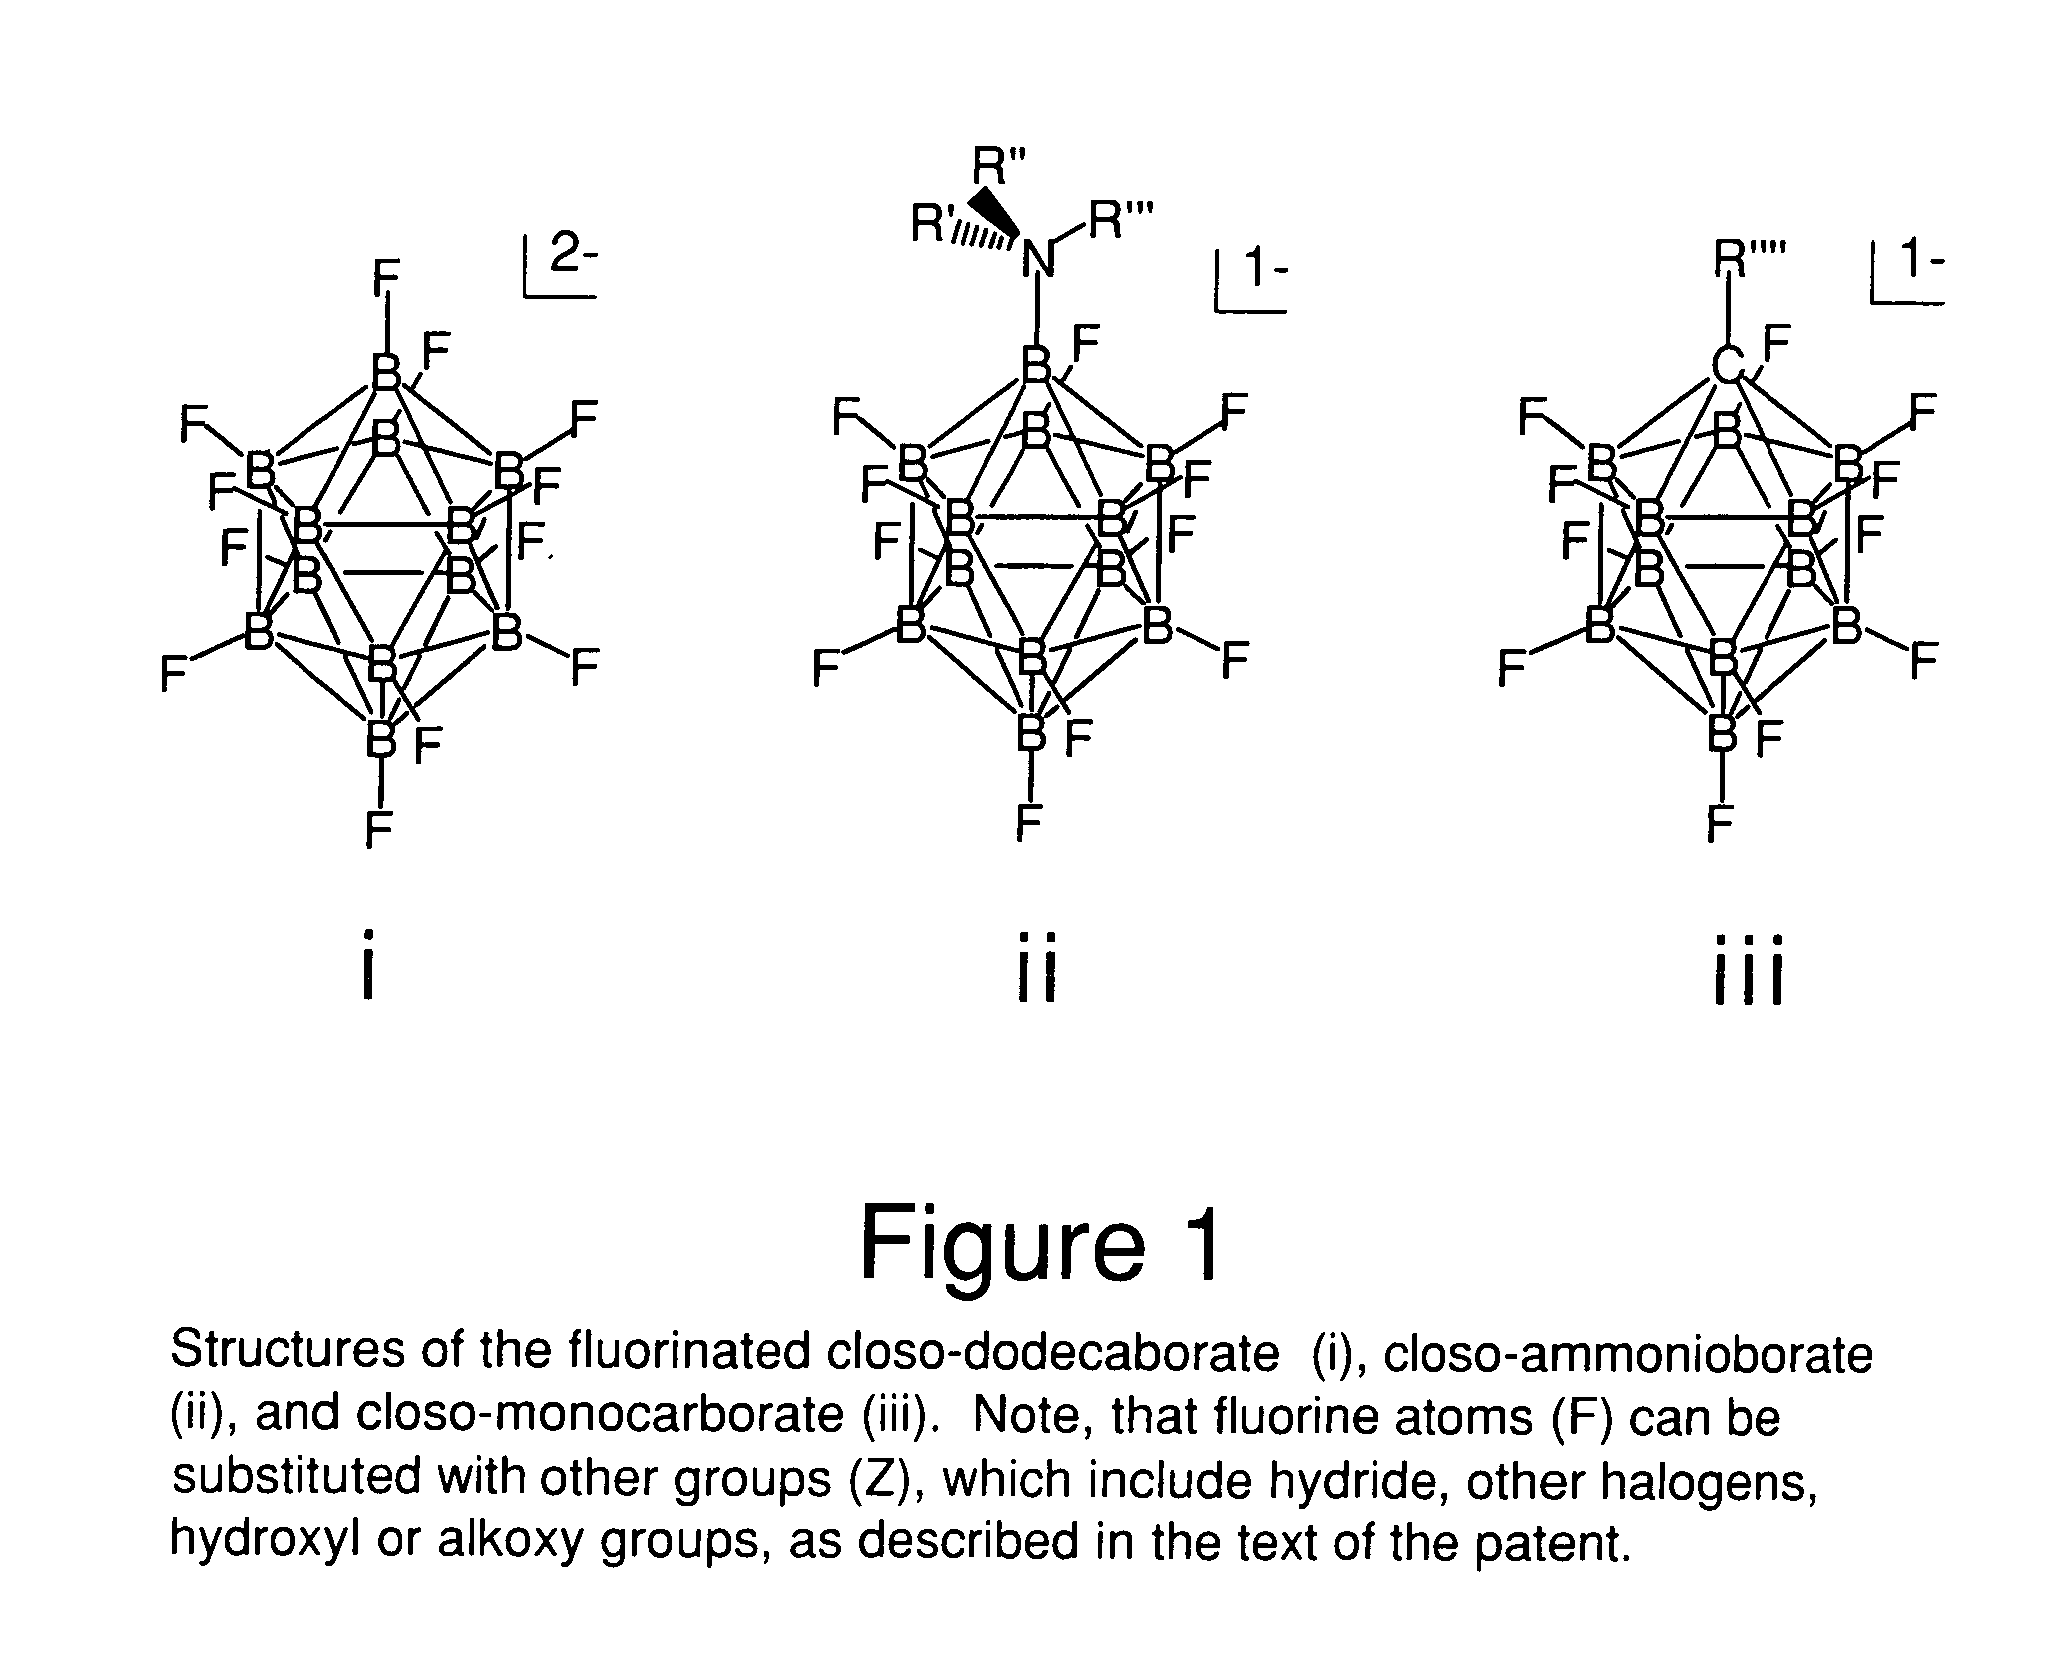 Stable electrolyte counteranions for electrochemical devices